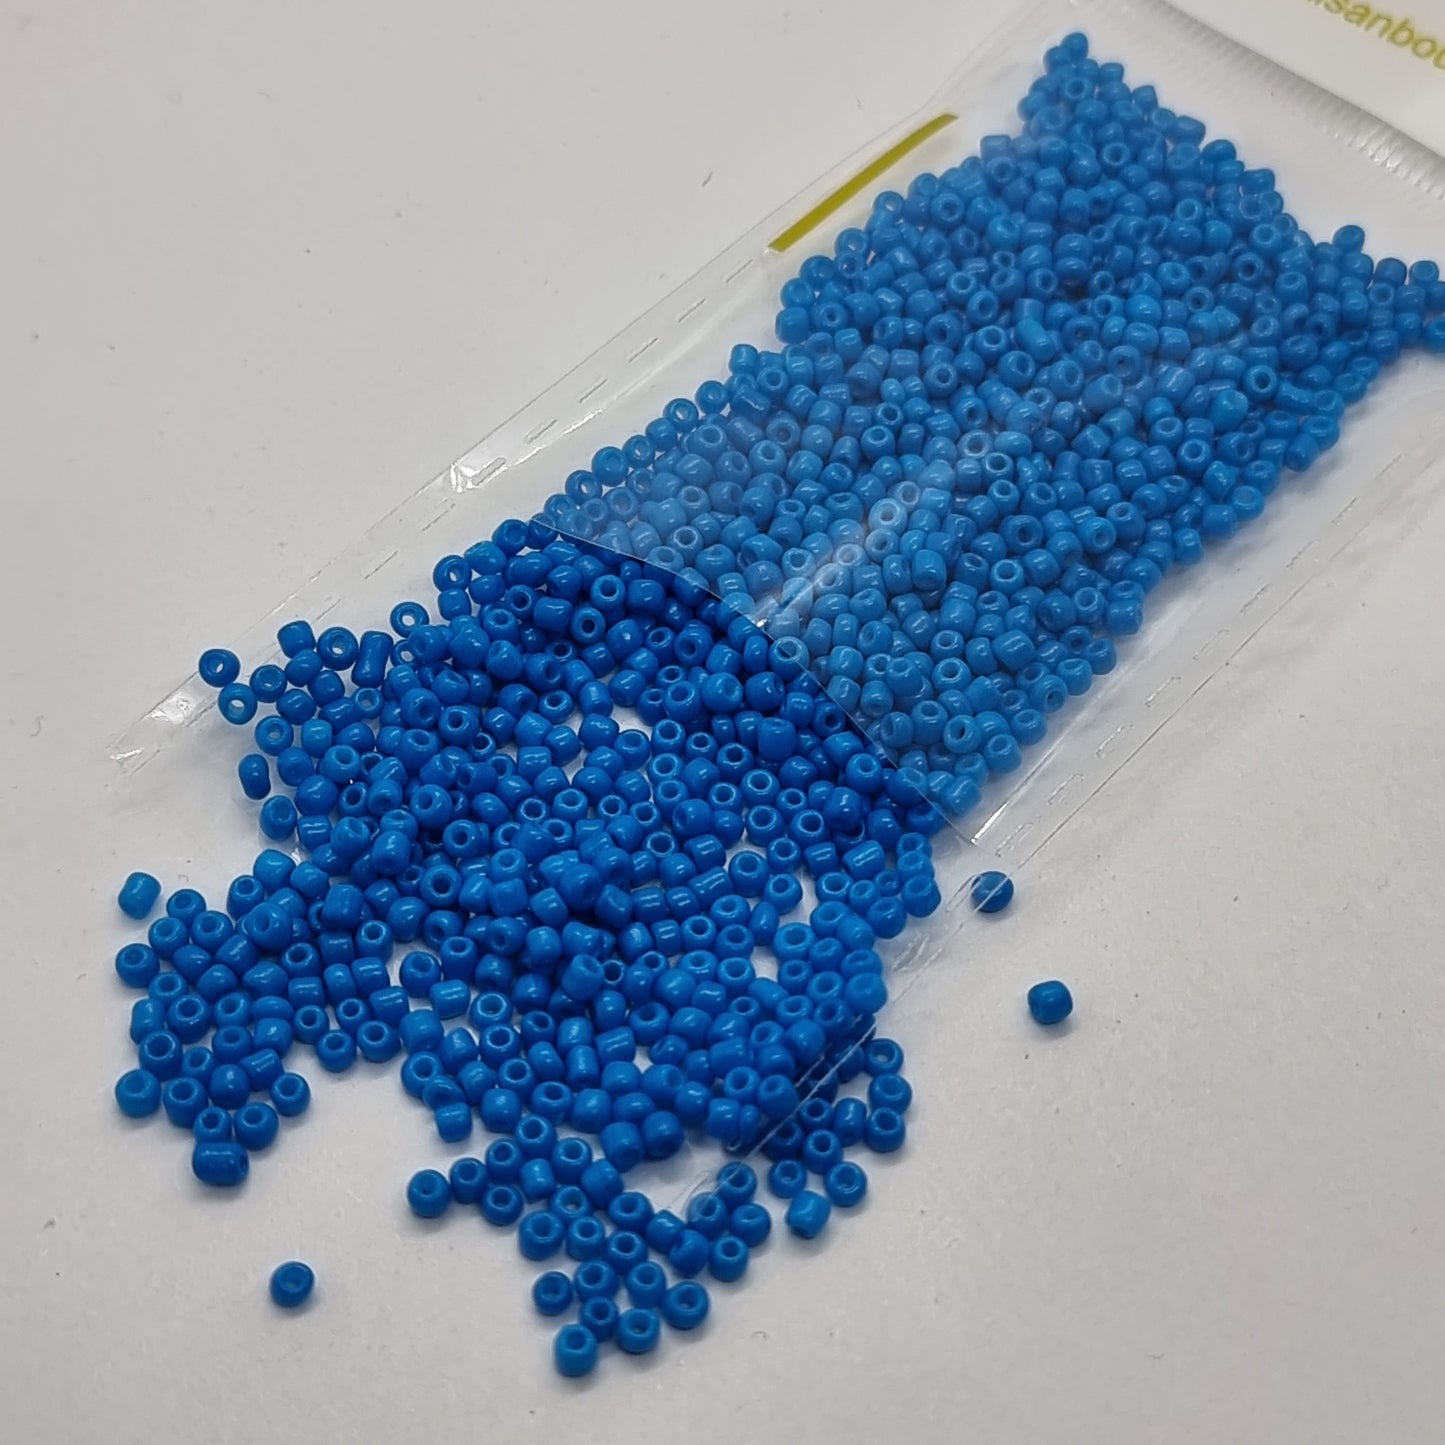 15g 2mm Bright Blue Painted Seed Beads